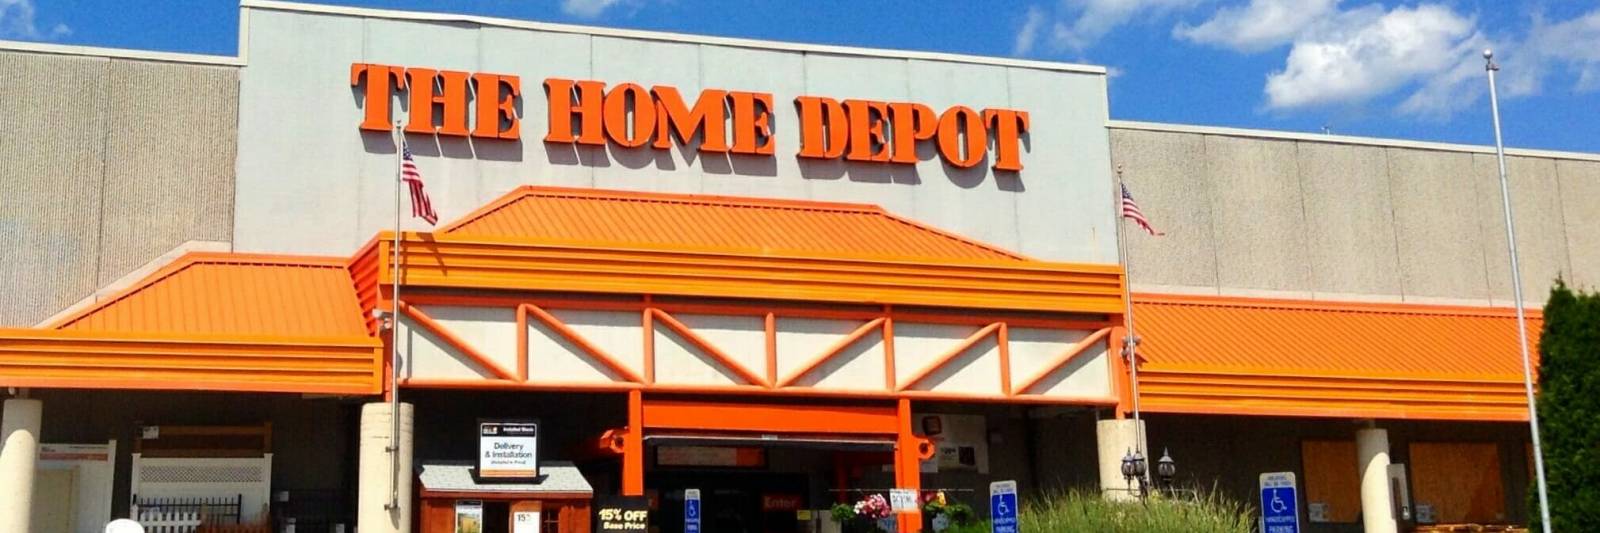 Home Depot Settles With State Ags For 2014 Point Of Sale Hack